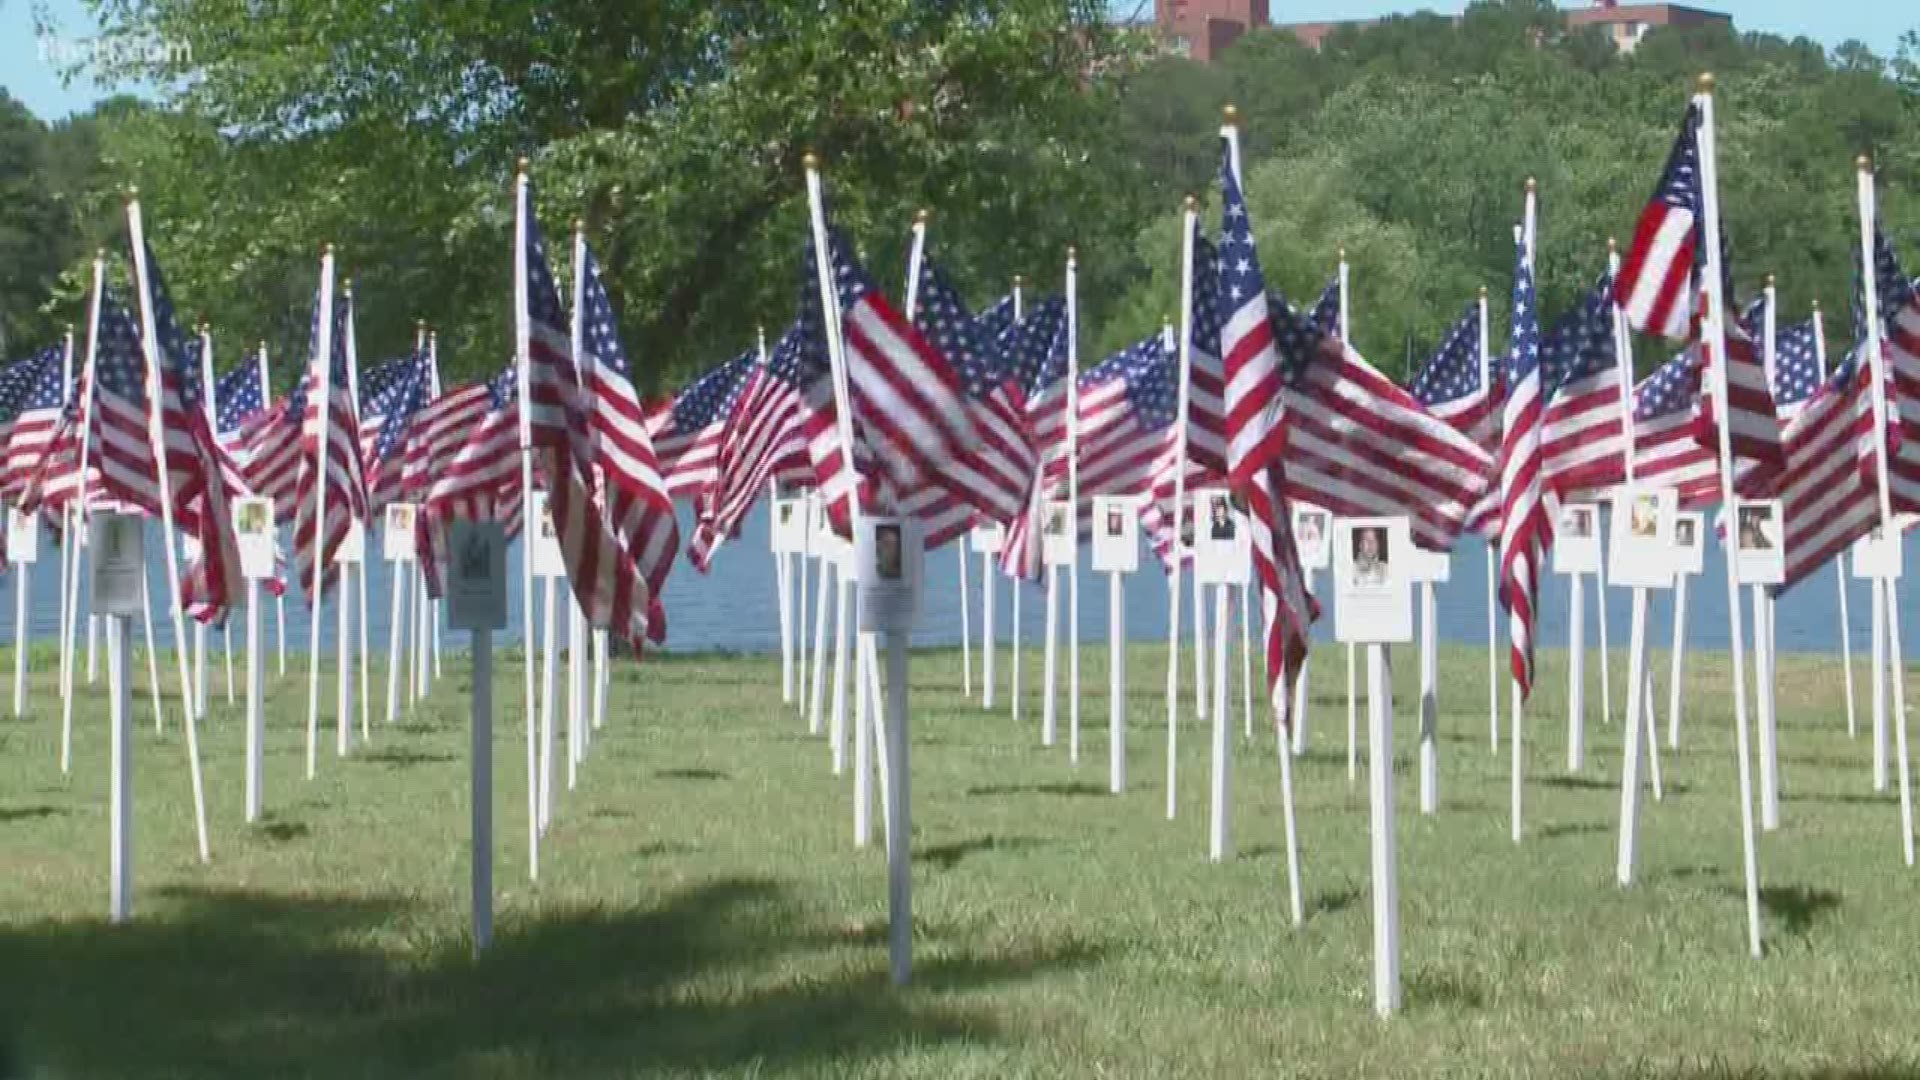 A special memorial was placed at Lake Willastein in Maumelle honoring Arkansas service members who have given their lives to their country since 9/11.